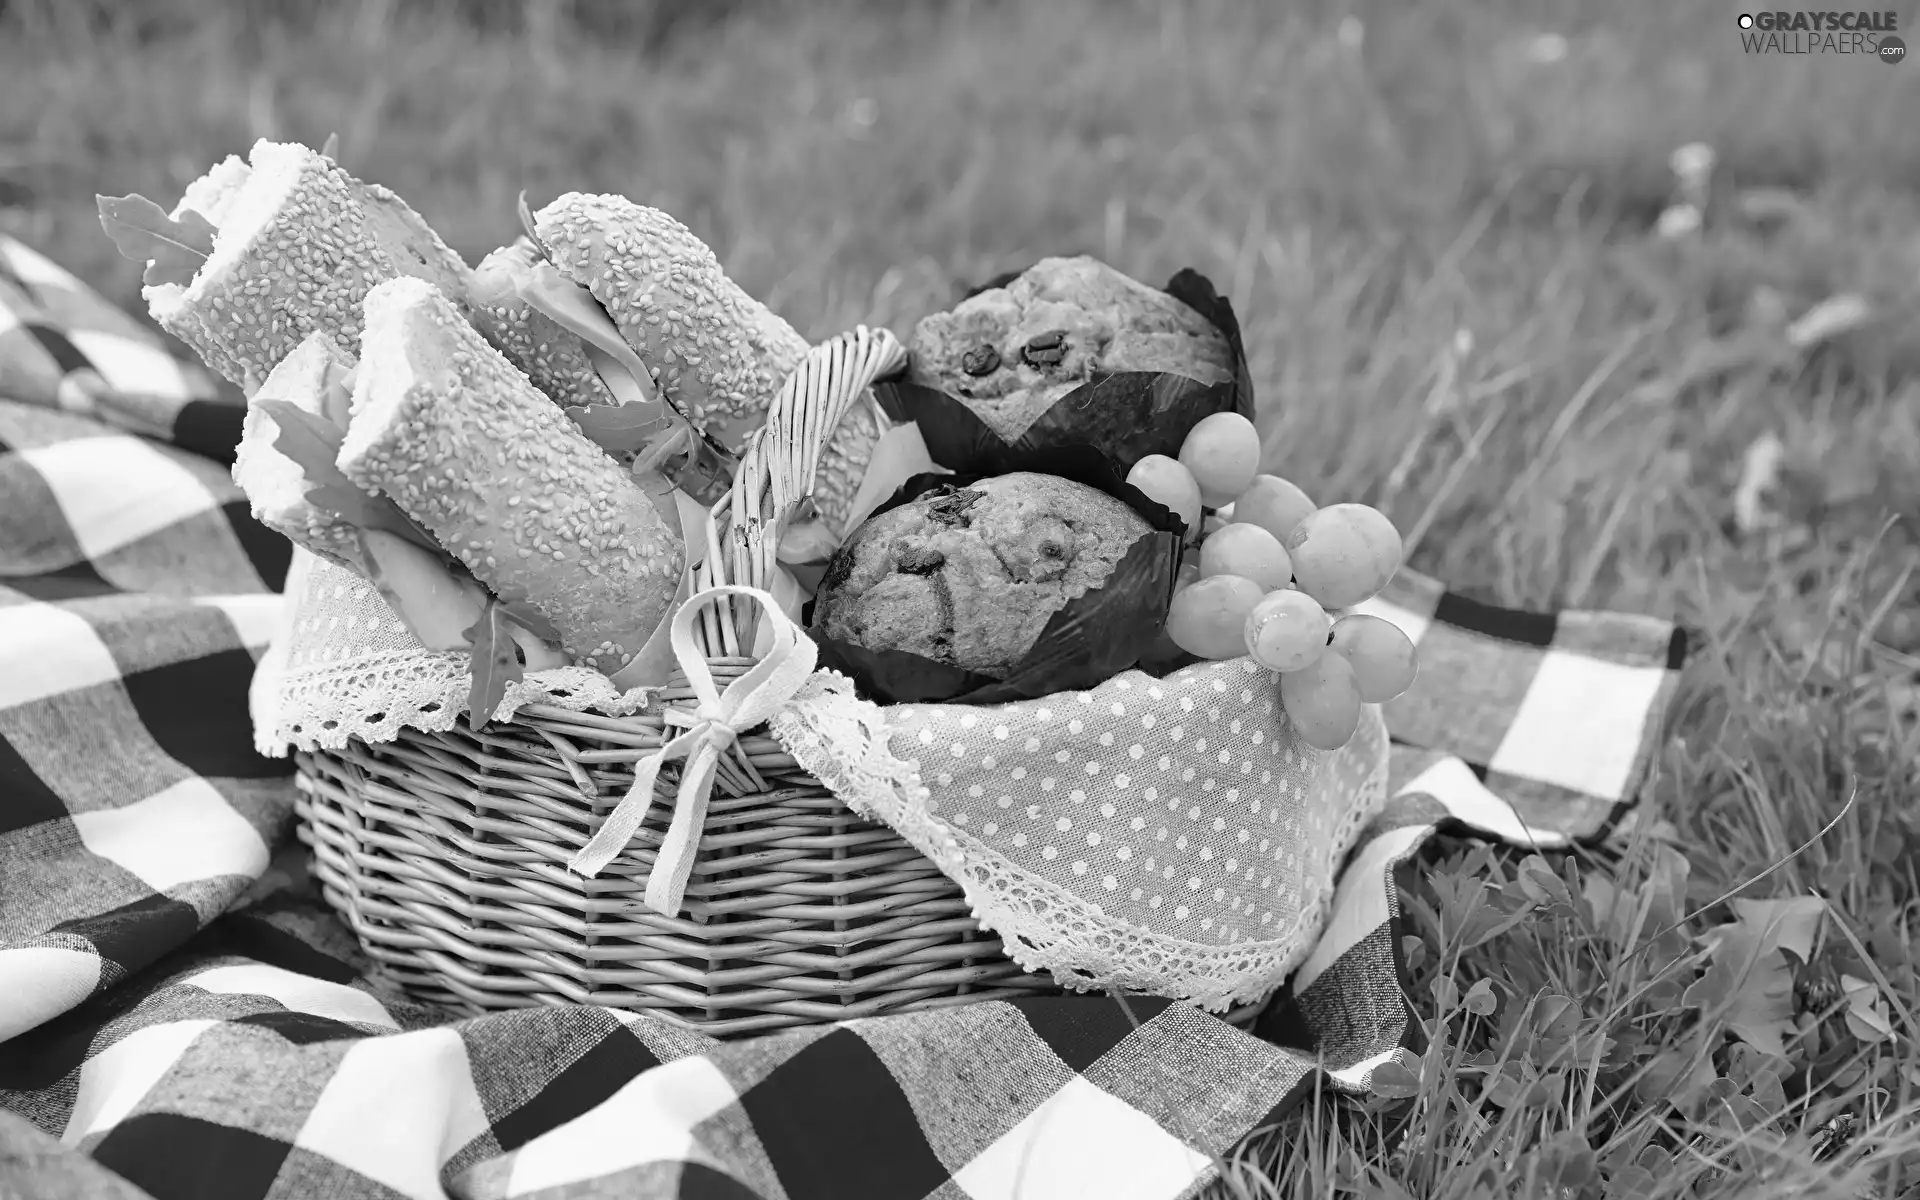 Meadow, picnic, grass, coverlet, sandwiches, muffins, basket, bread, wicker